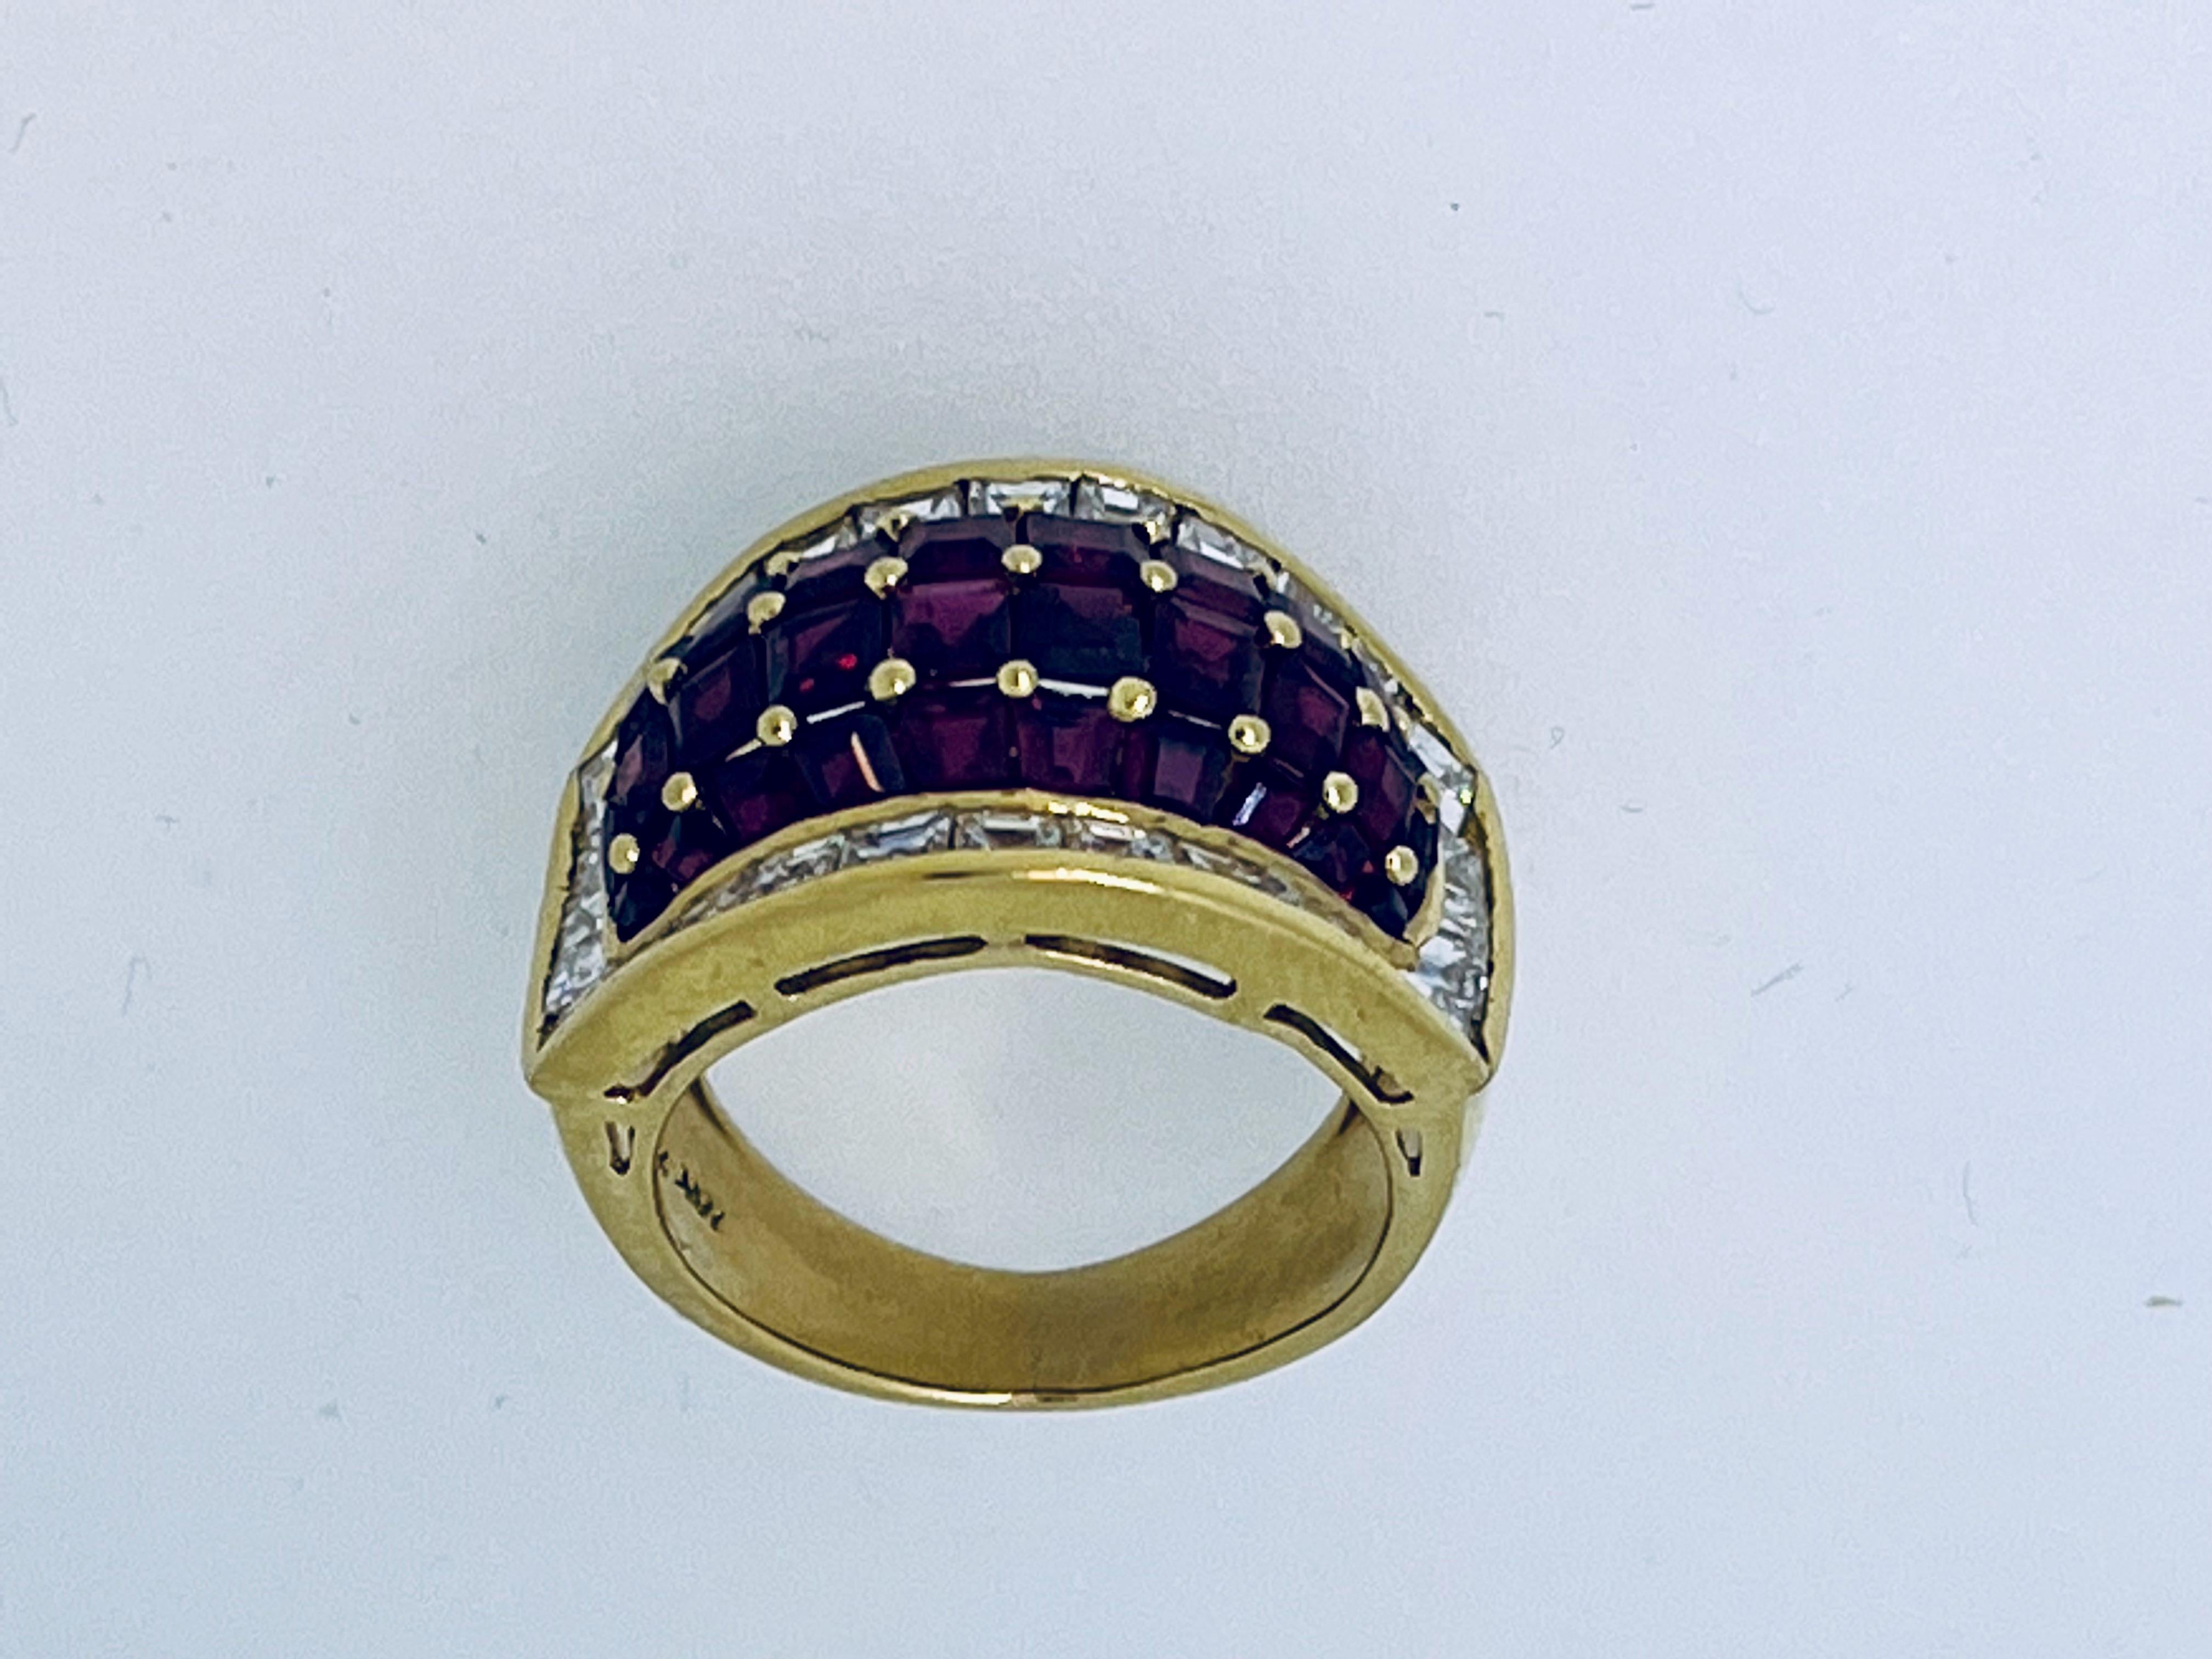 Stamped 18ct Gold, 1.40ct Diamonds and 5ct Ruby Italian Vintage Ring For Sale 1